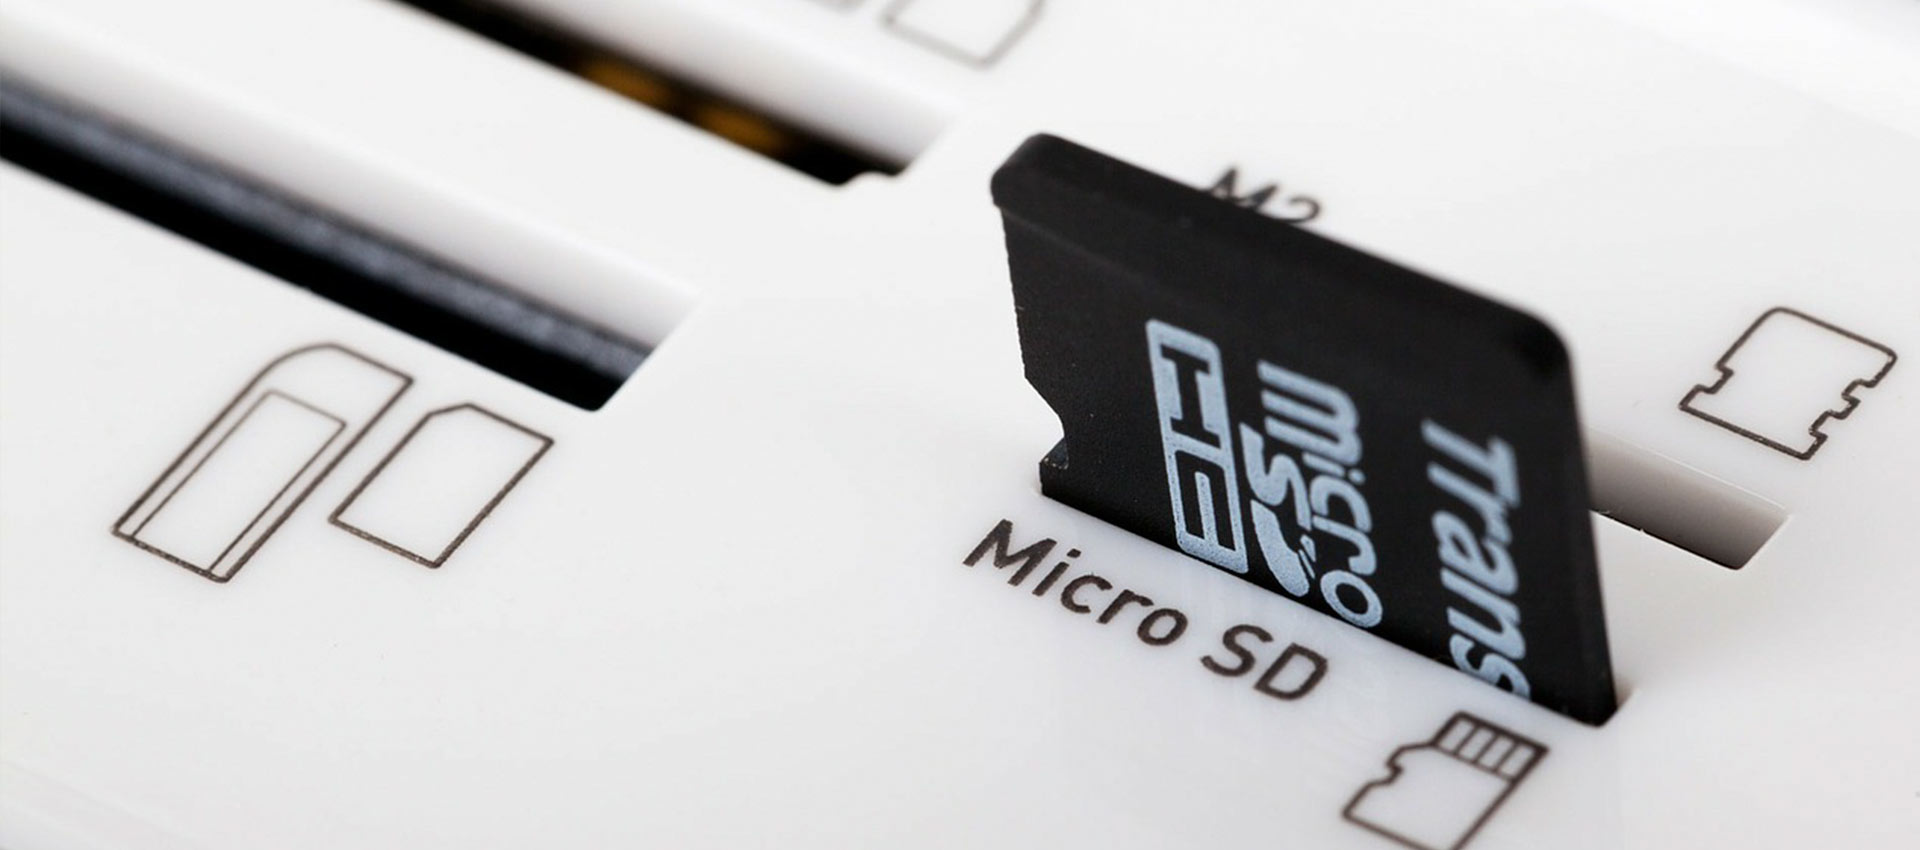 Micro SD Card for your Camera in Pakistan - How to choose the best one?